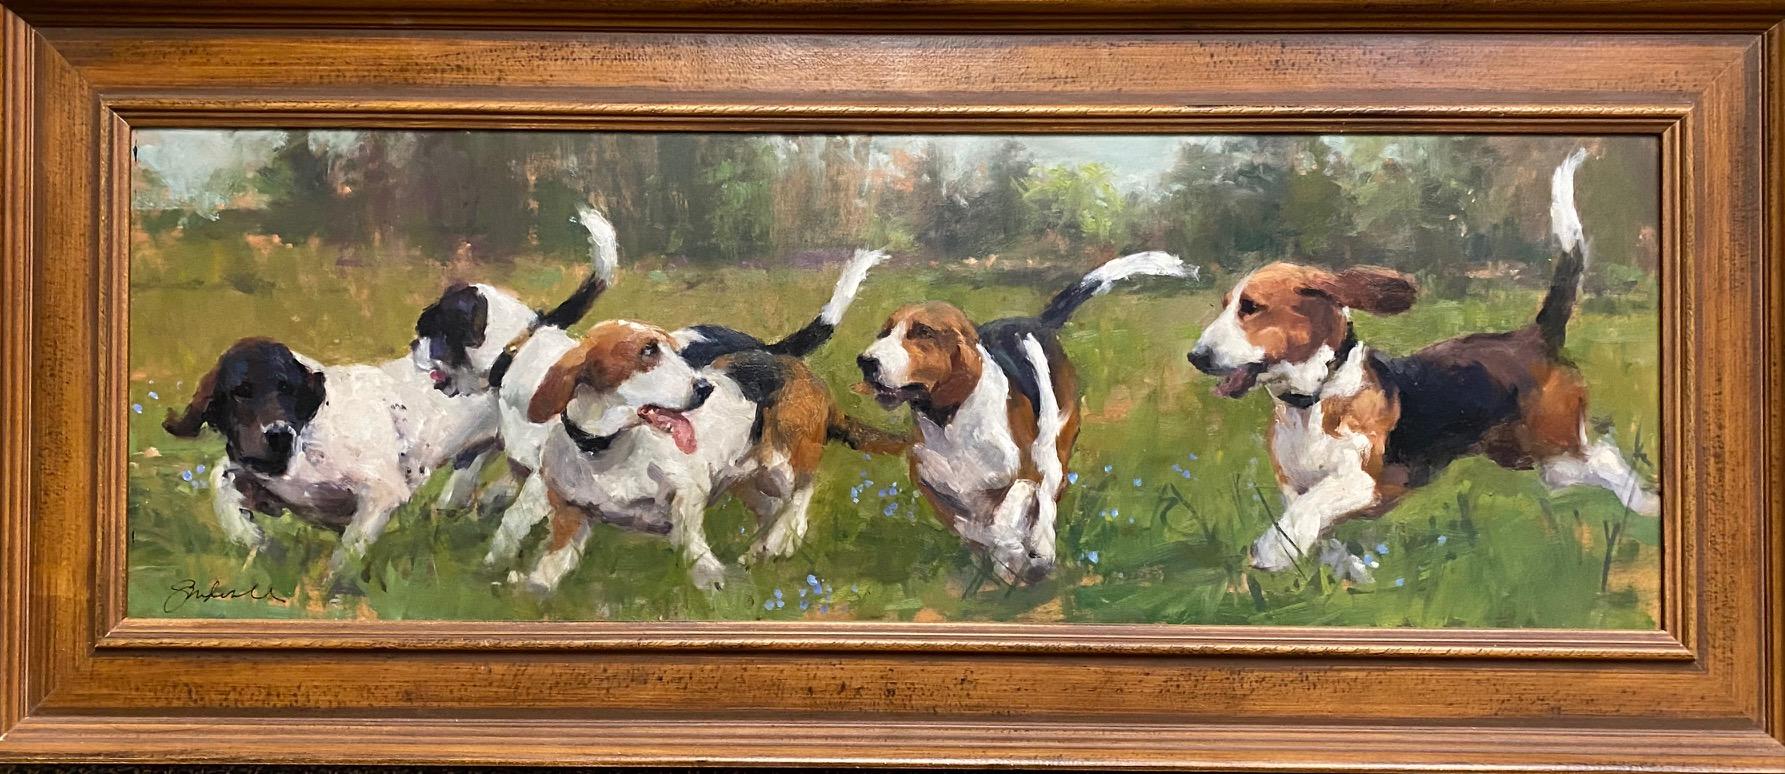 Who Let the Dogs Out?, original 10x30 dog portrait and landscape - Painting by Joseph Sundwall